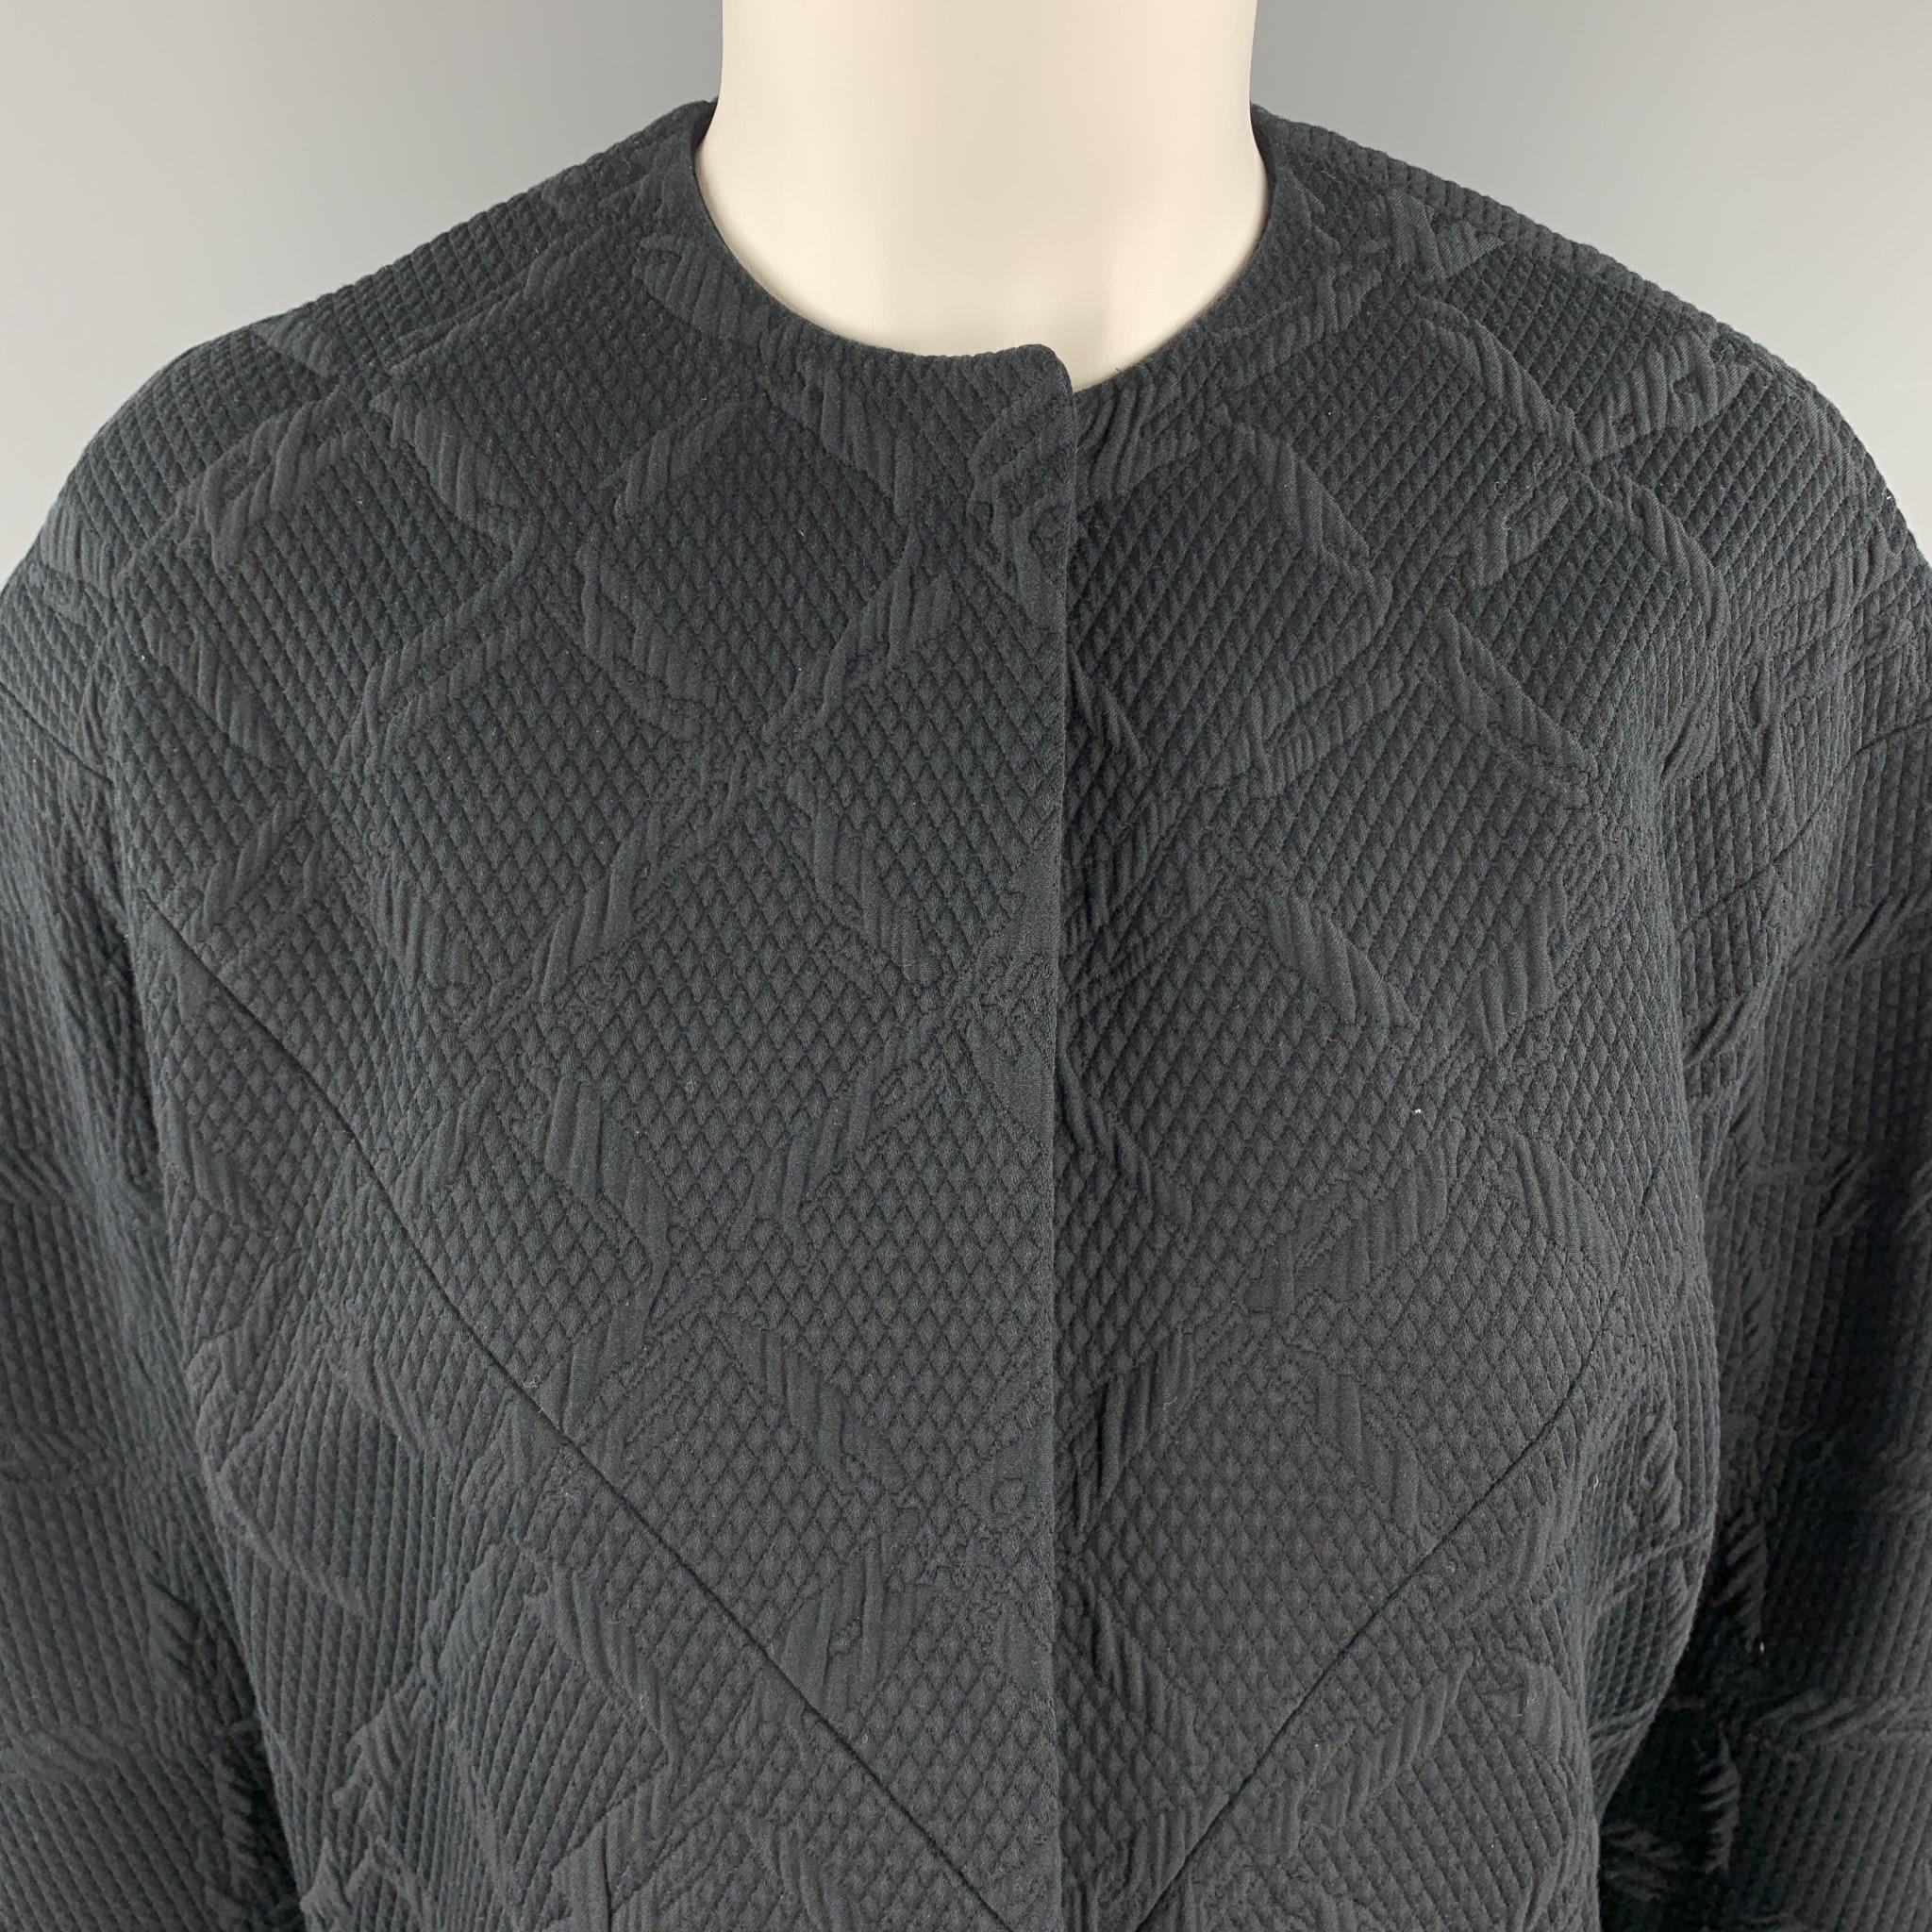 BALENCIAGA by ALEXANDER WANG jacket comes in a wire fence textured cotton jacquard with a round collarless, neckline, single top snap closure, and cropped hem. Made in Italy.  Retail $1795

New with Tags. 
Marked: FR 36

Measurements:

Shoulder: 18